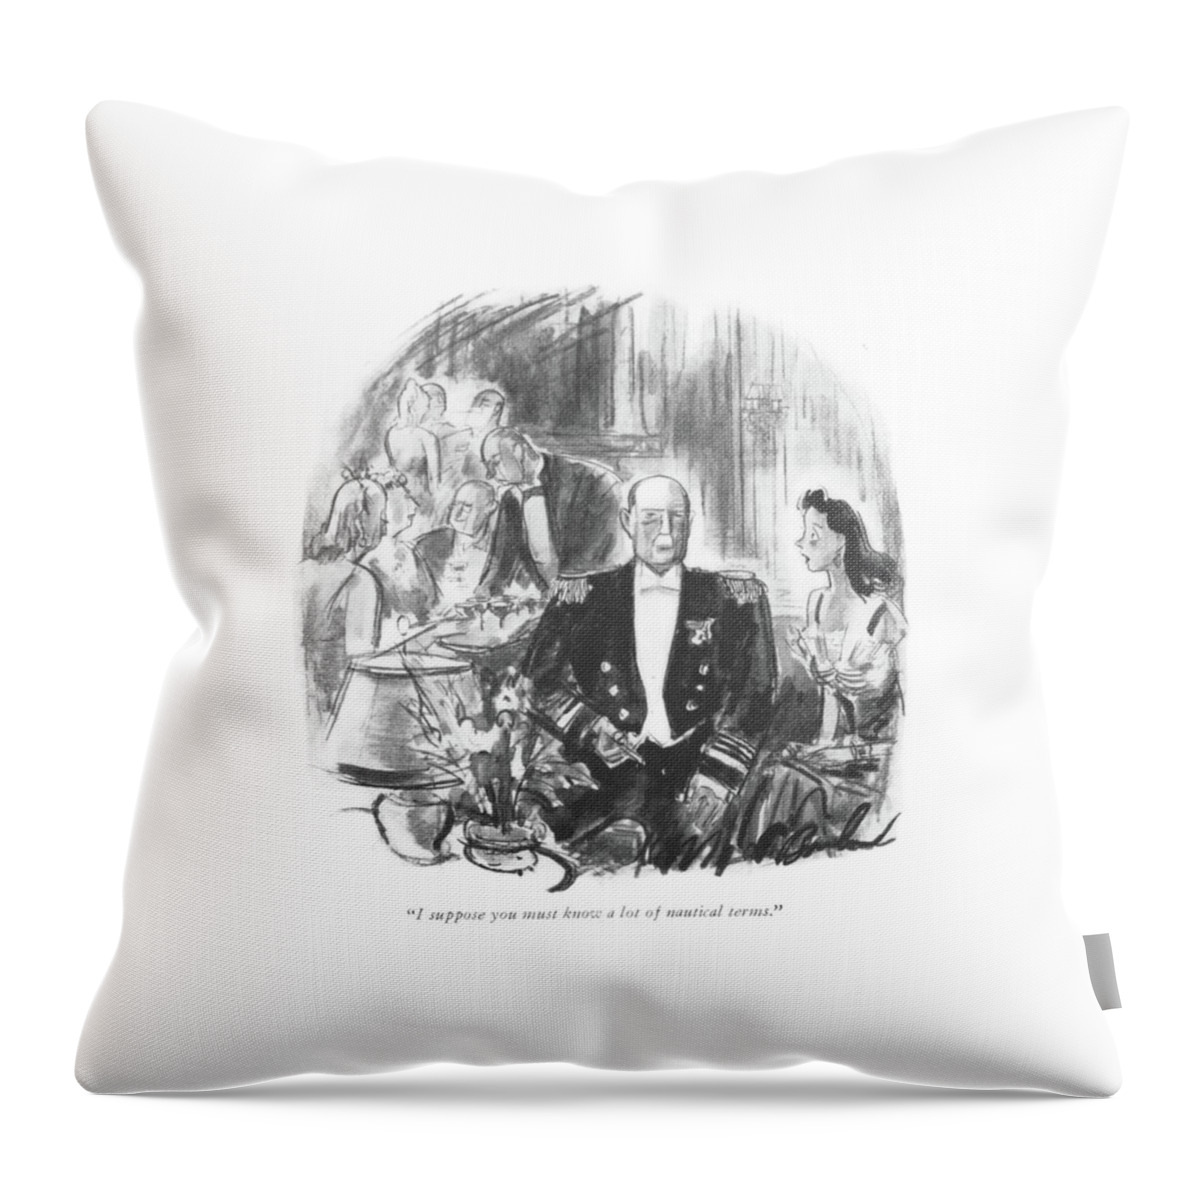 I Suppose You Must Know A Lot Of Nautical Terms Throw Pillow